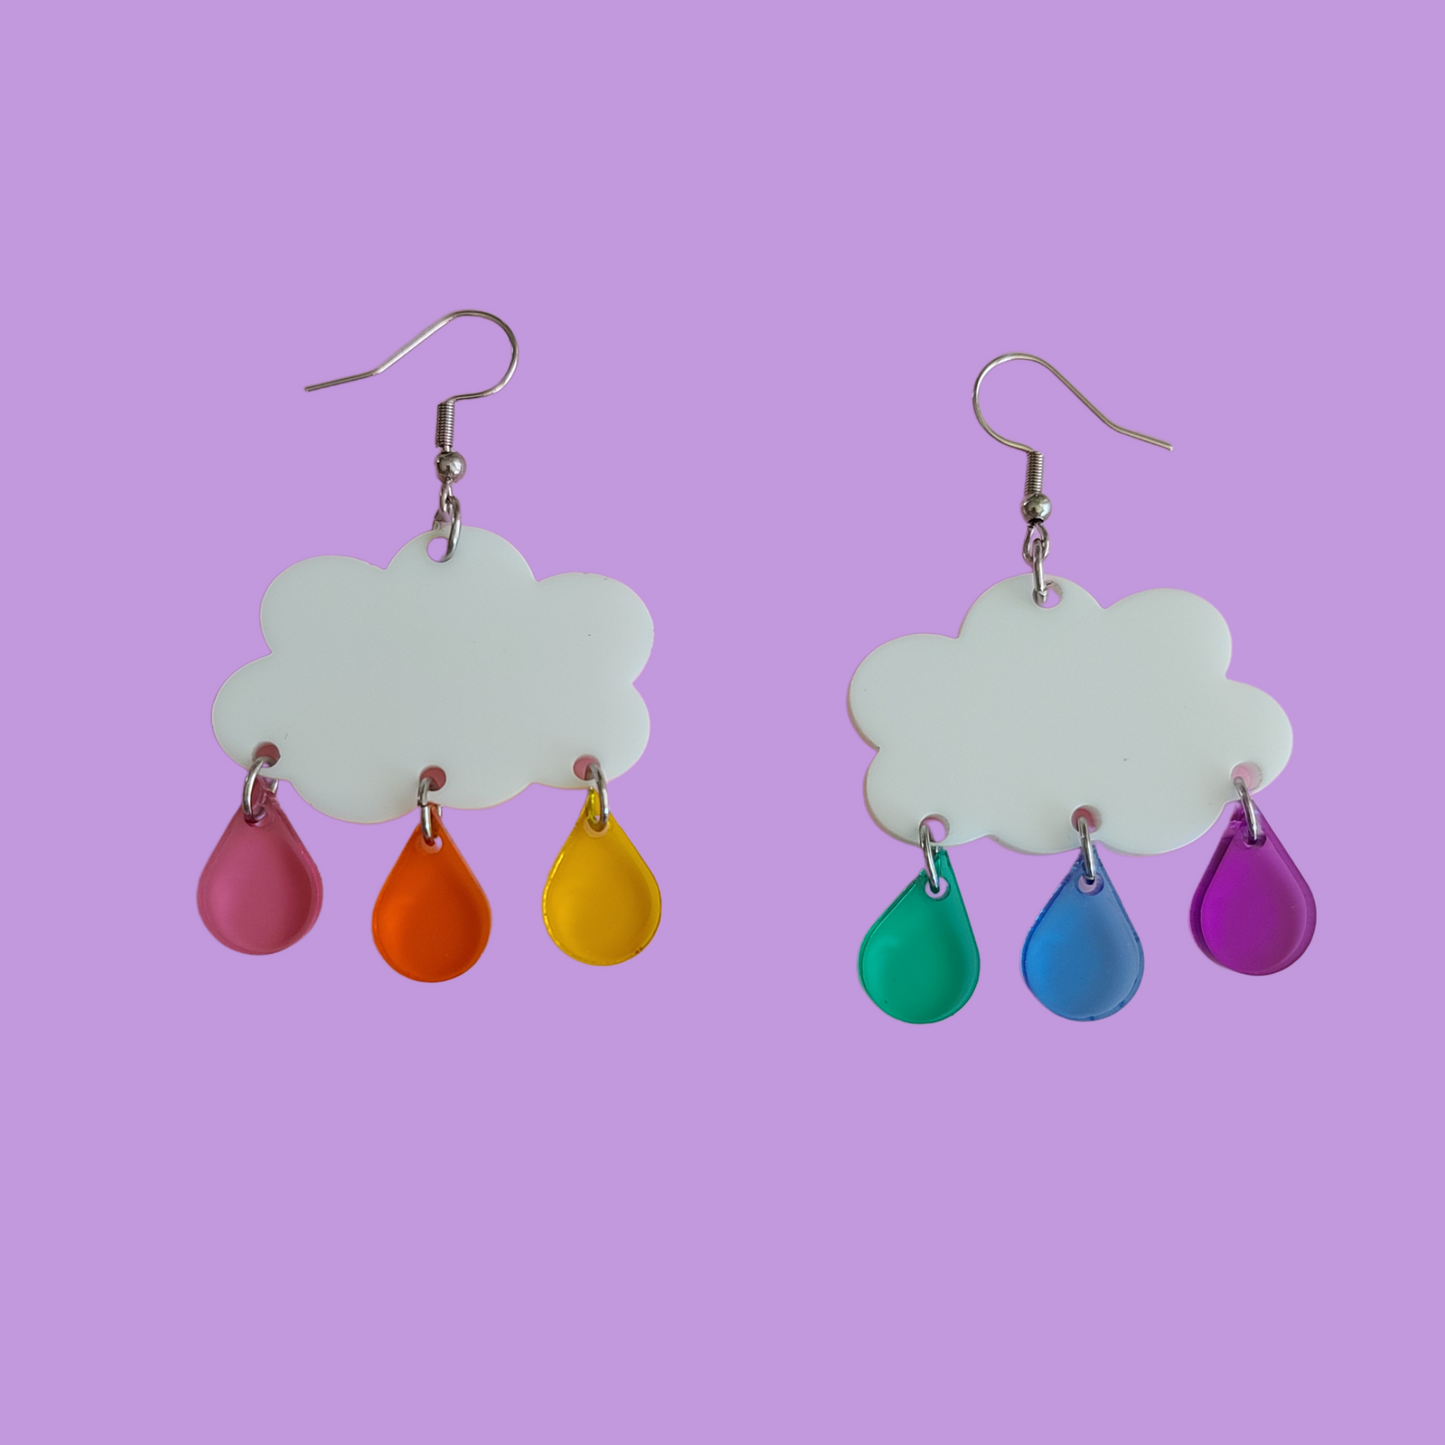 White Clouds with Rainbow Translucent Raindrops - Earrings - Laser Cut